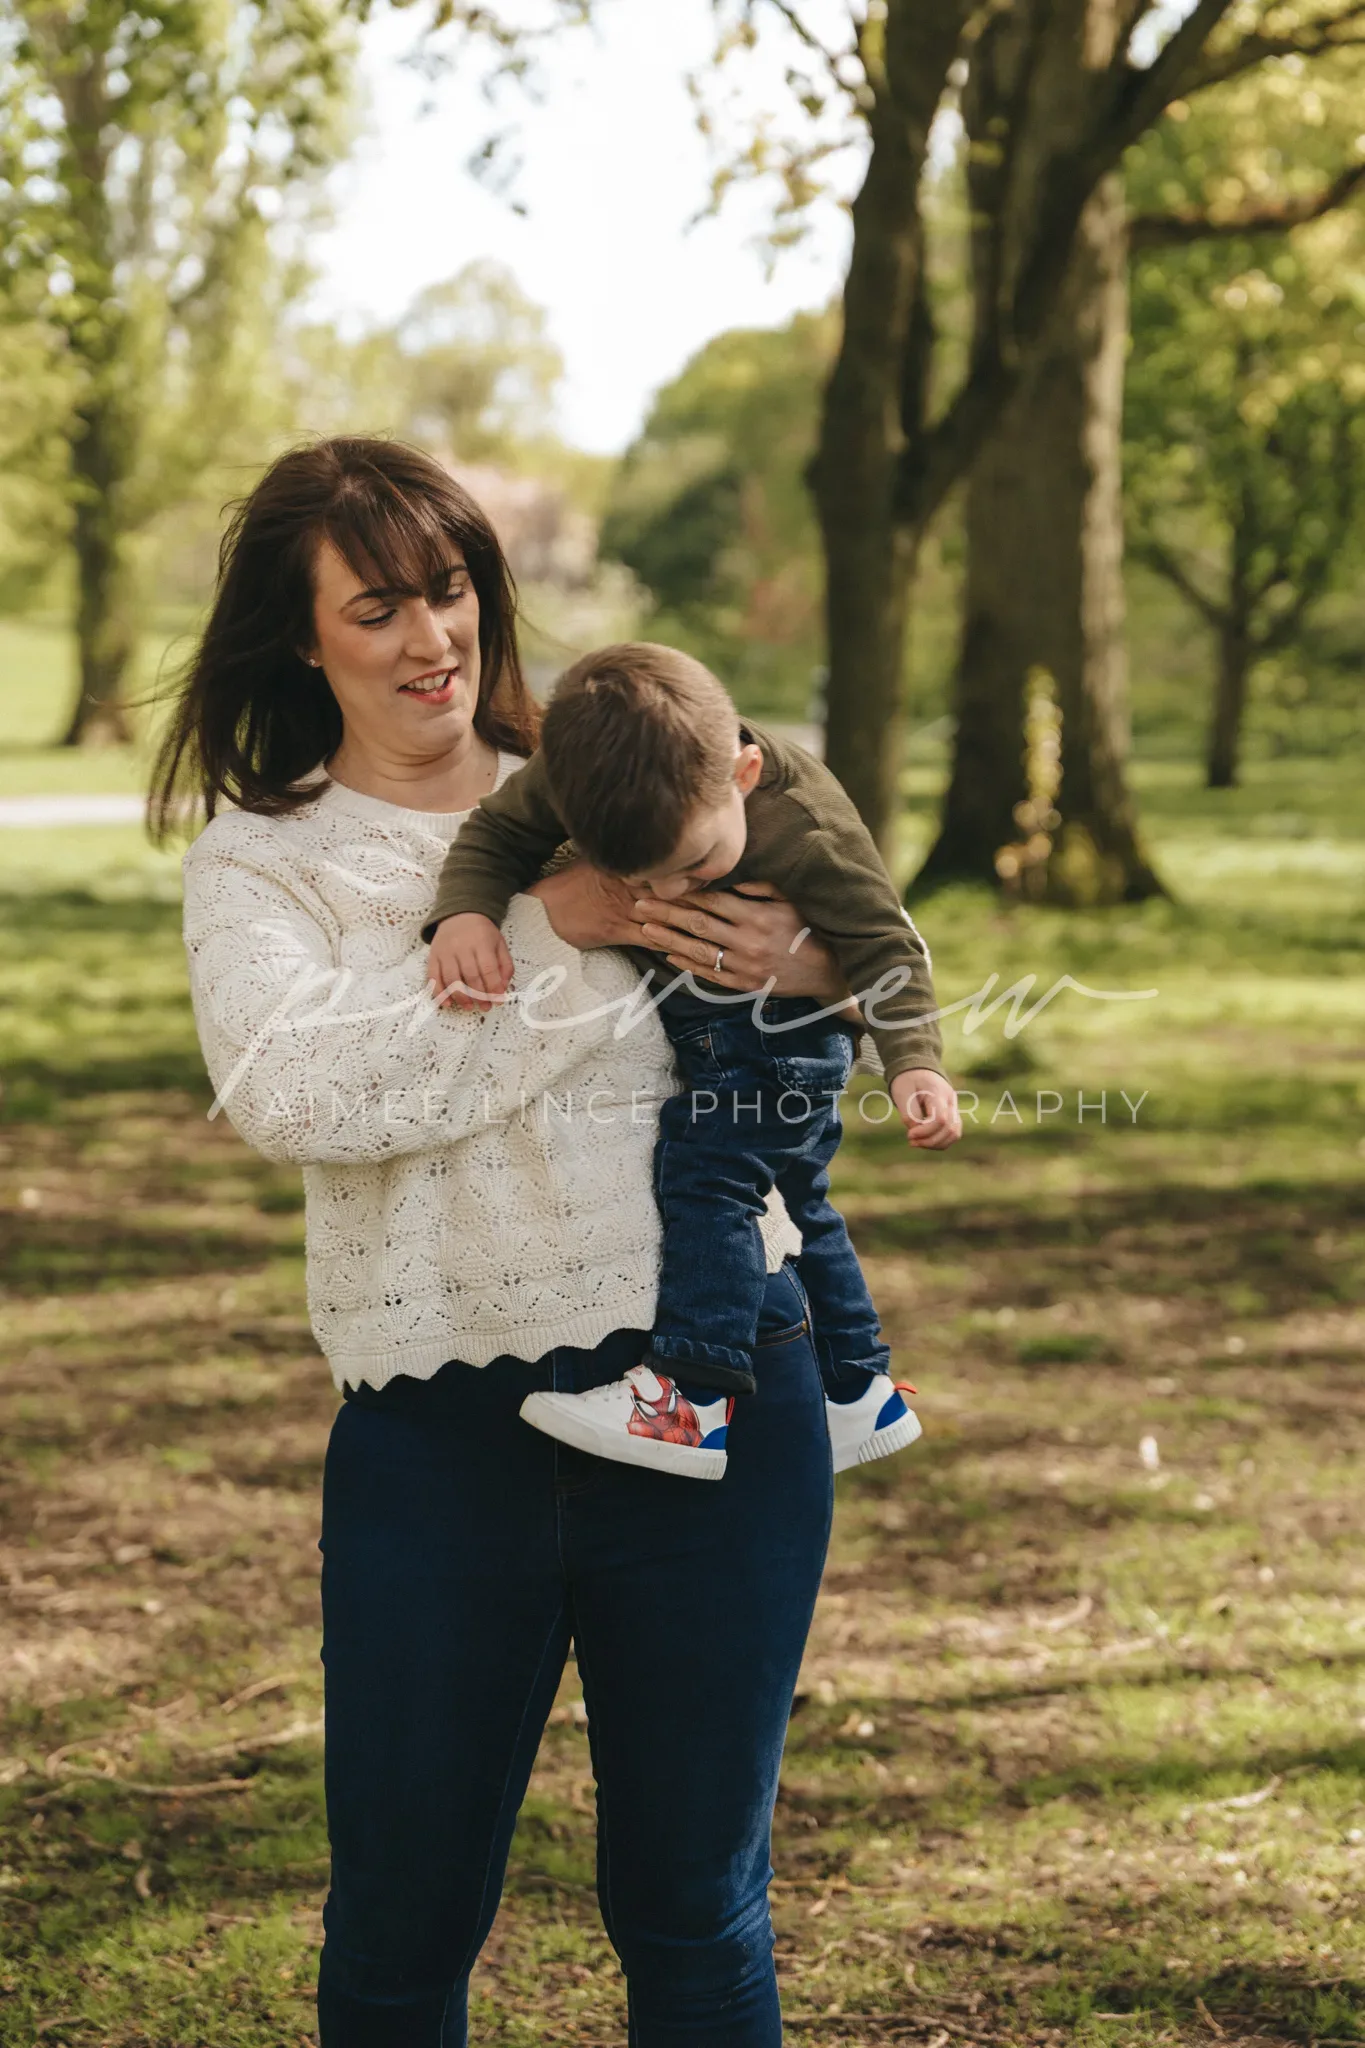 A joyful young woman holds a toddler in a park. the child, wearing a green jacket and jeans, playfully leans forward as the woman, dressed in a white sweater and blue jeans, supports him, both smiling amid sunlit trees.